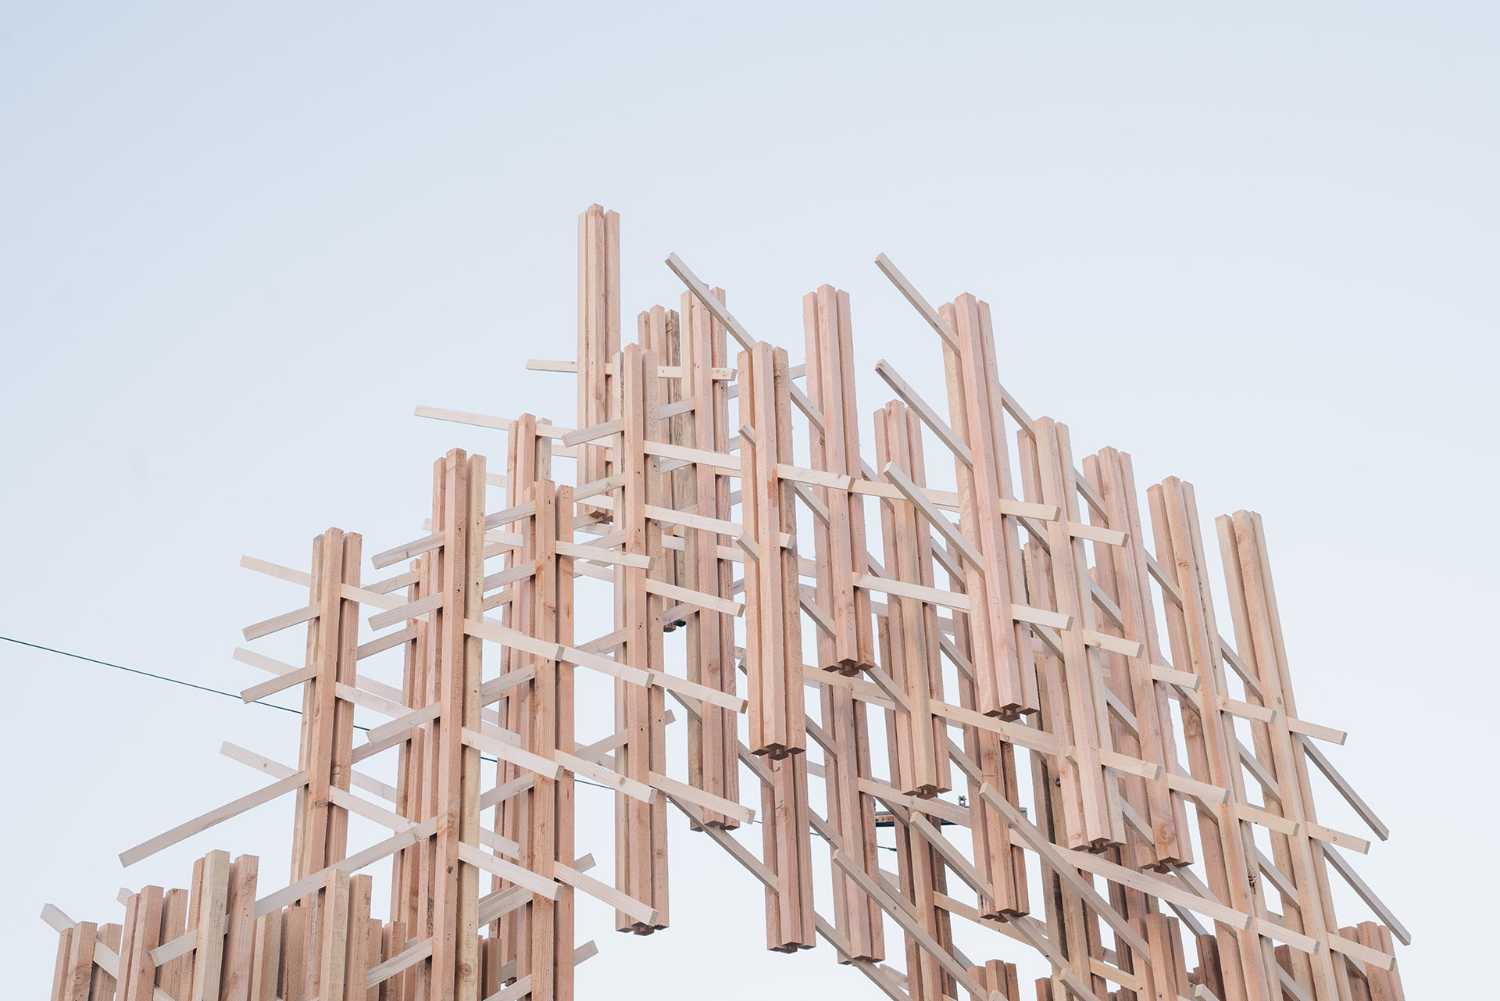 Mori. A wooden installation in Los Angeles that conceptualises the sense of togetherness